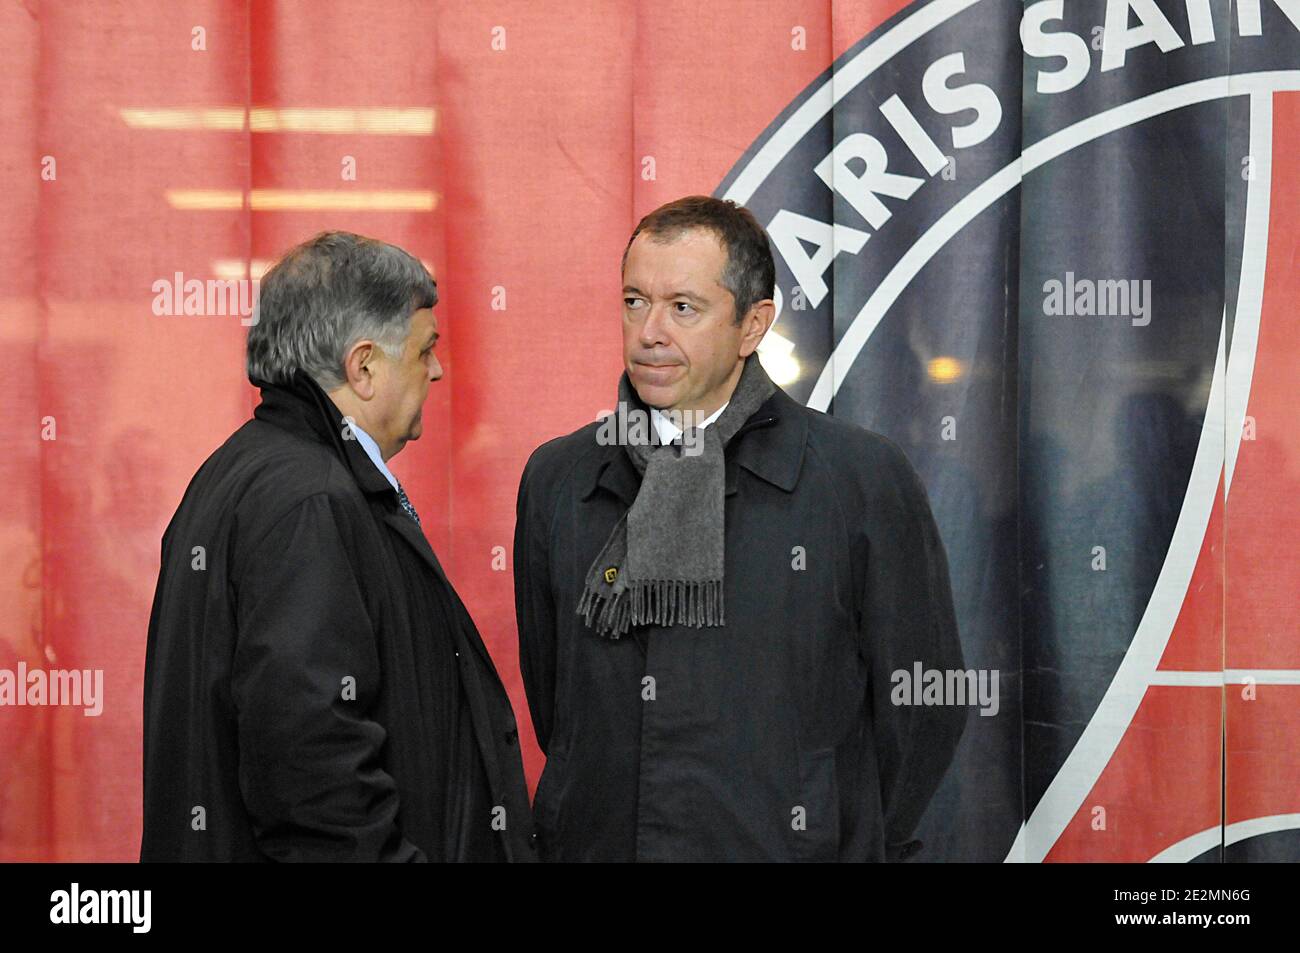 PSG's President Robin Leproux during the French First league soccer match, Paris Saint Germain vs Lorient at the Parc des Princes in Paris, France on February 06, 2010. Lorient won 3-0. Photo by Thierry Plessis/ABACAPRESS.COM Stock Photo